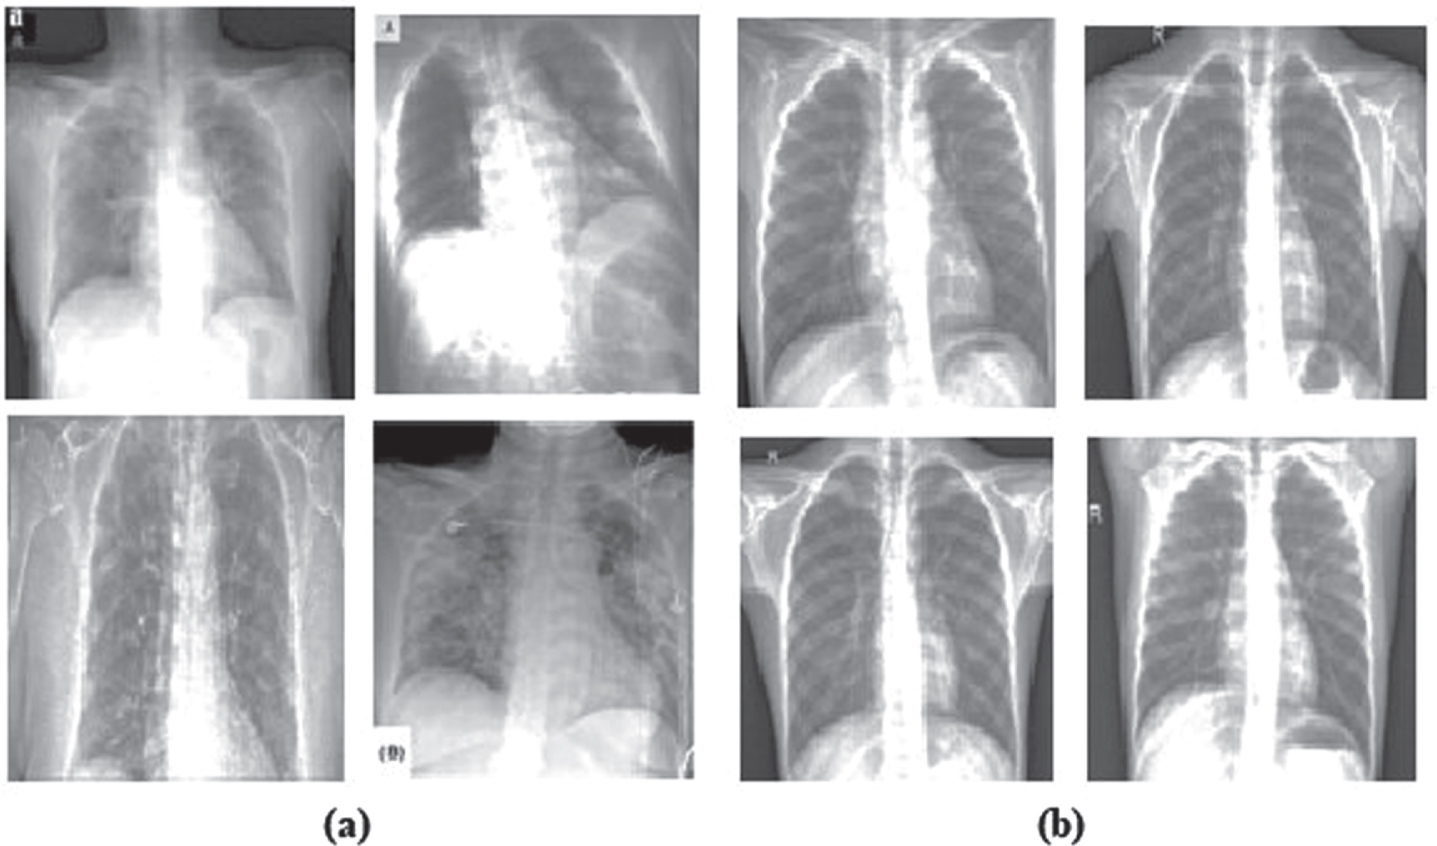 (a) positive (i.e., infected) COVID-19 X-ray images (b) negative samples.